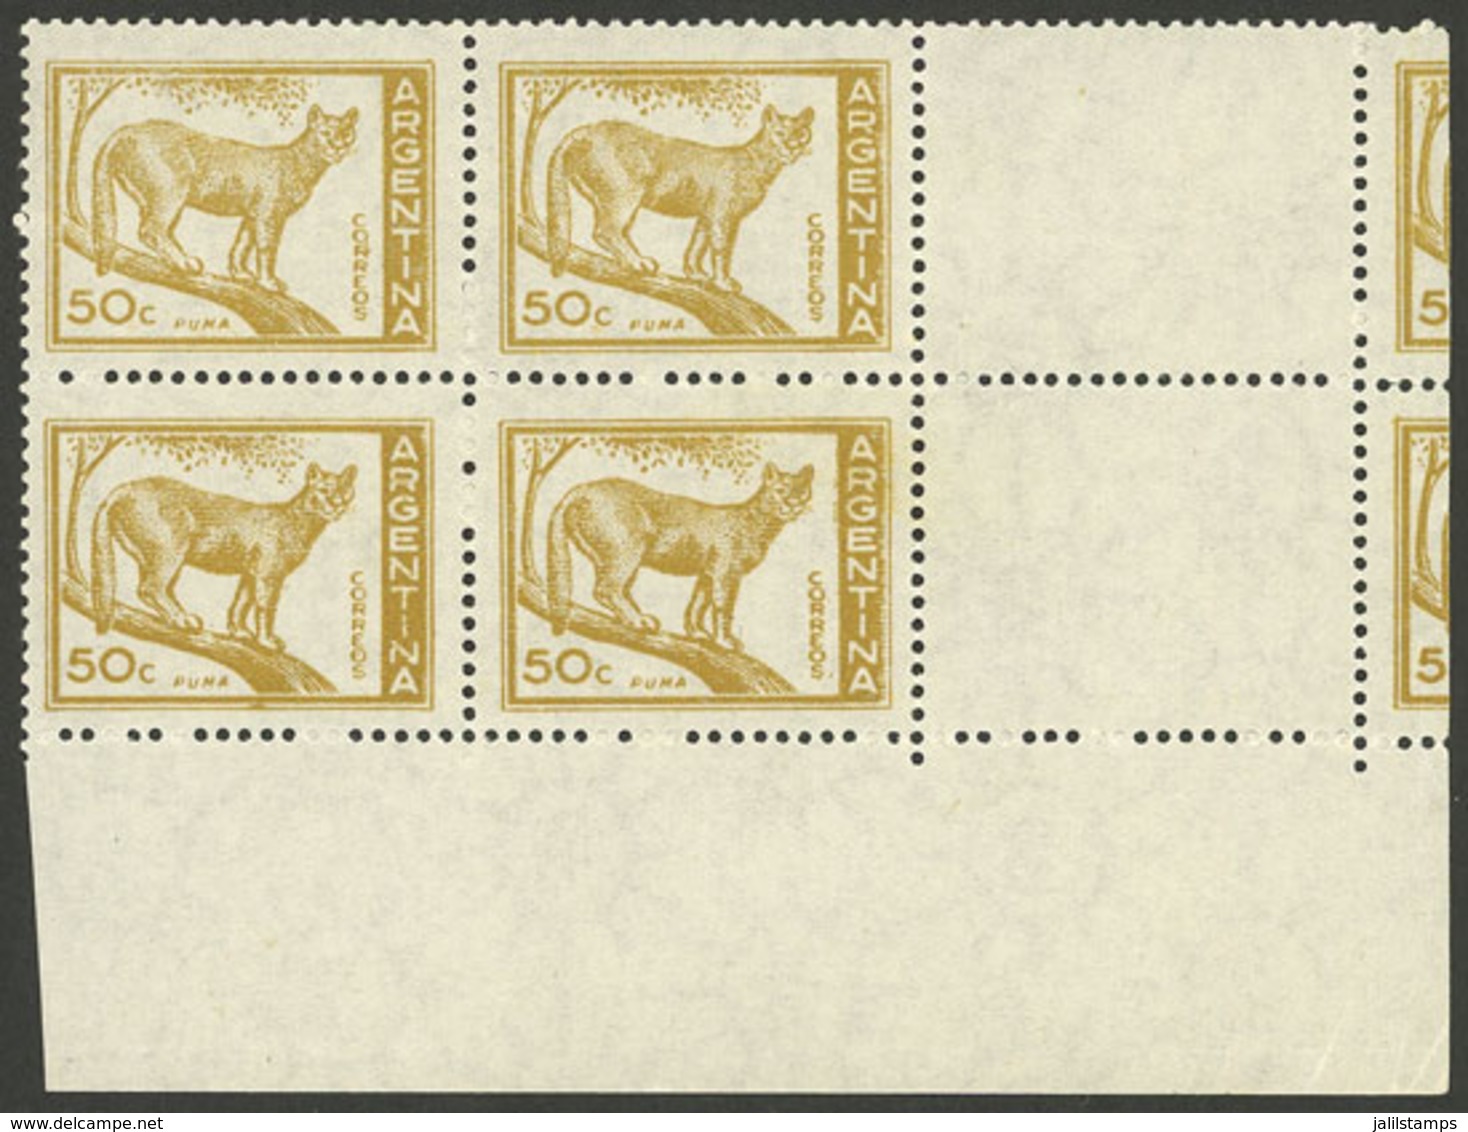 ARGENTINA: GJ.1125CD, 50c. Puma Typographed, Block Of 4 WITH RIGHT LABELS, MNH, Not Catalogued, Extremely Rare! - Unused Stamps